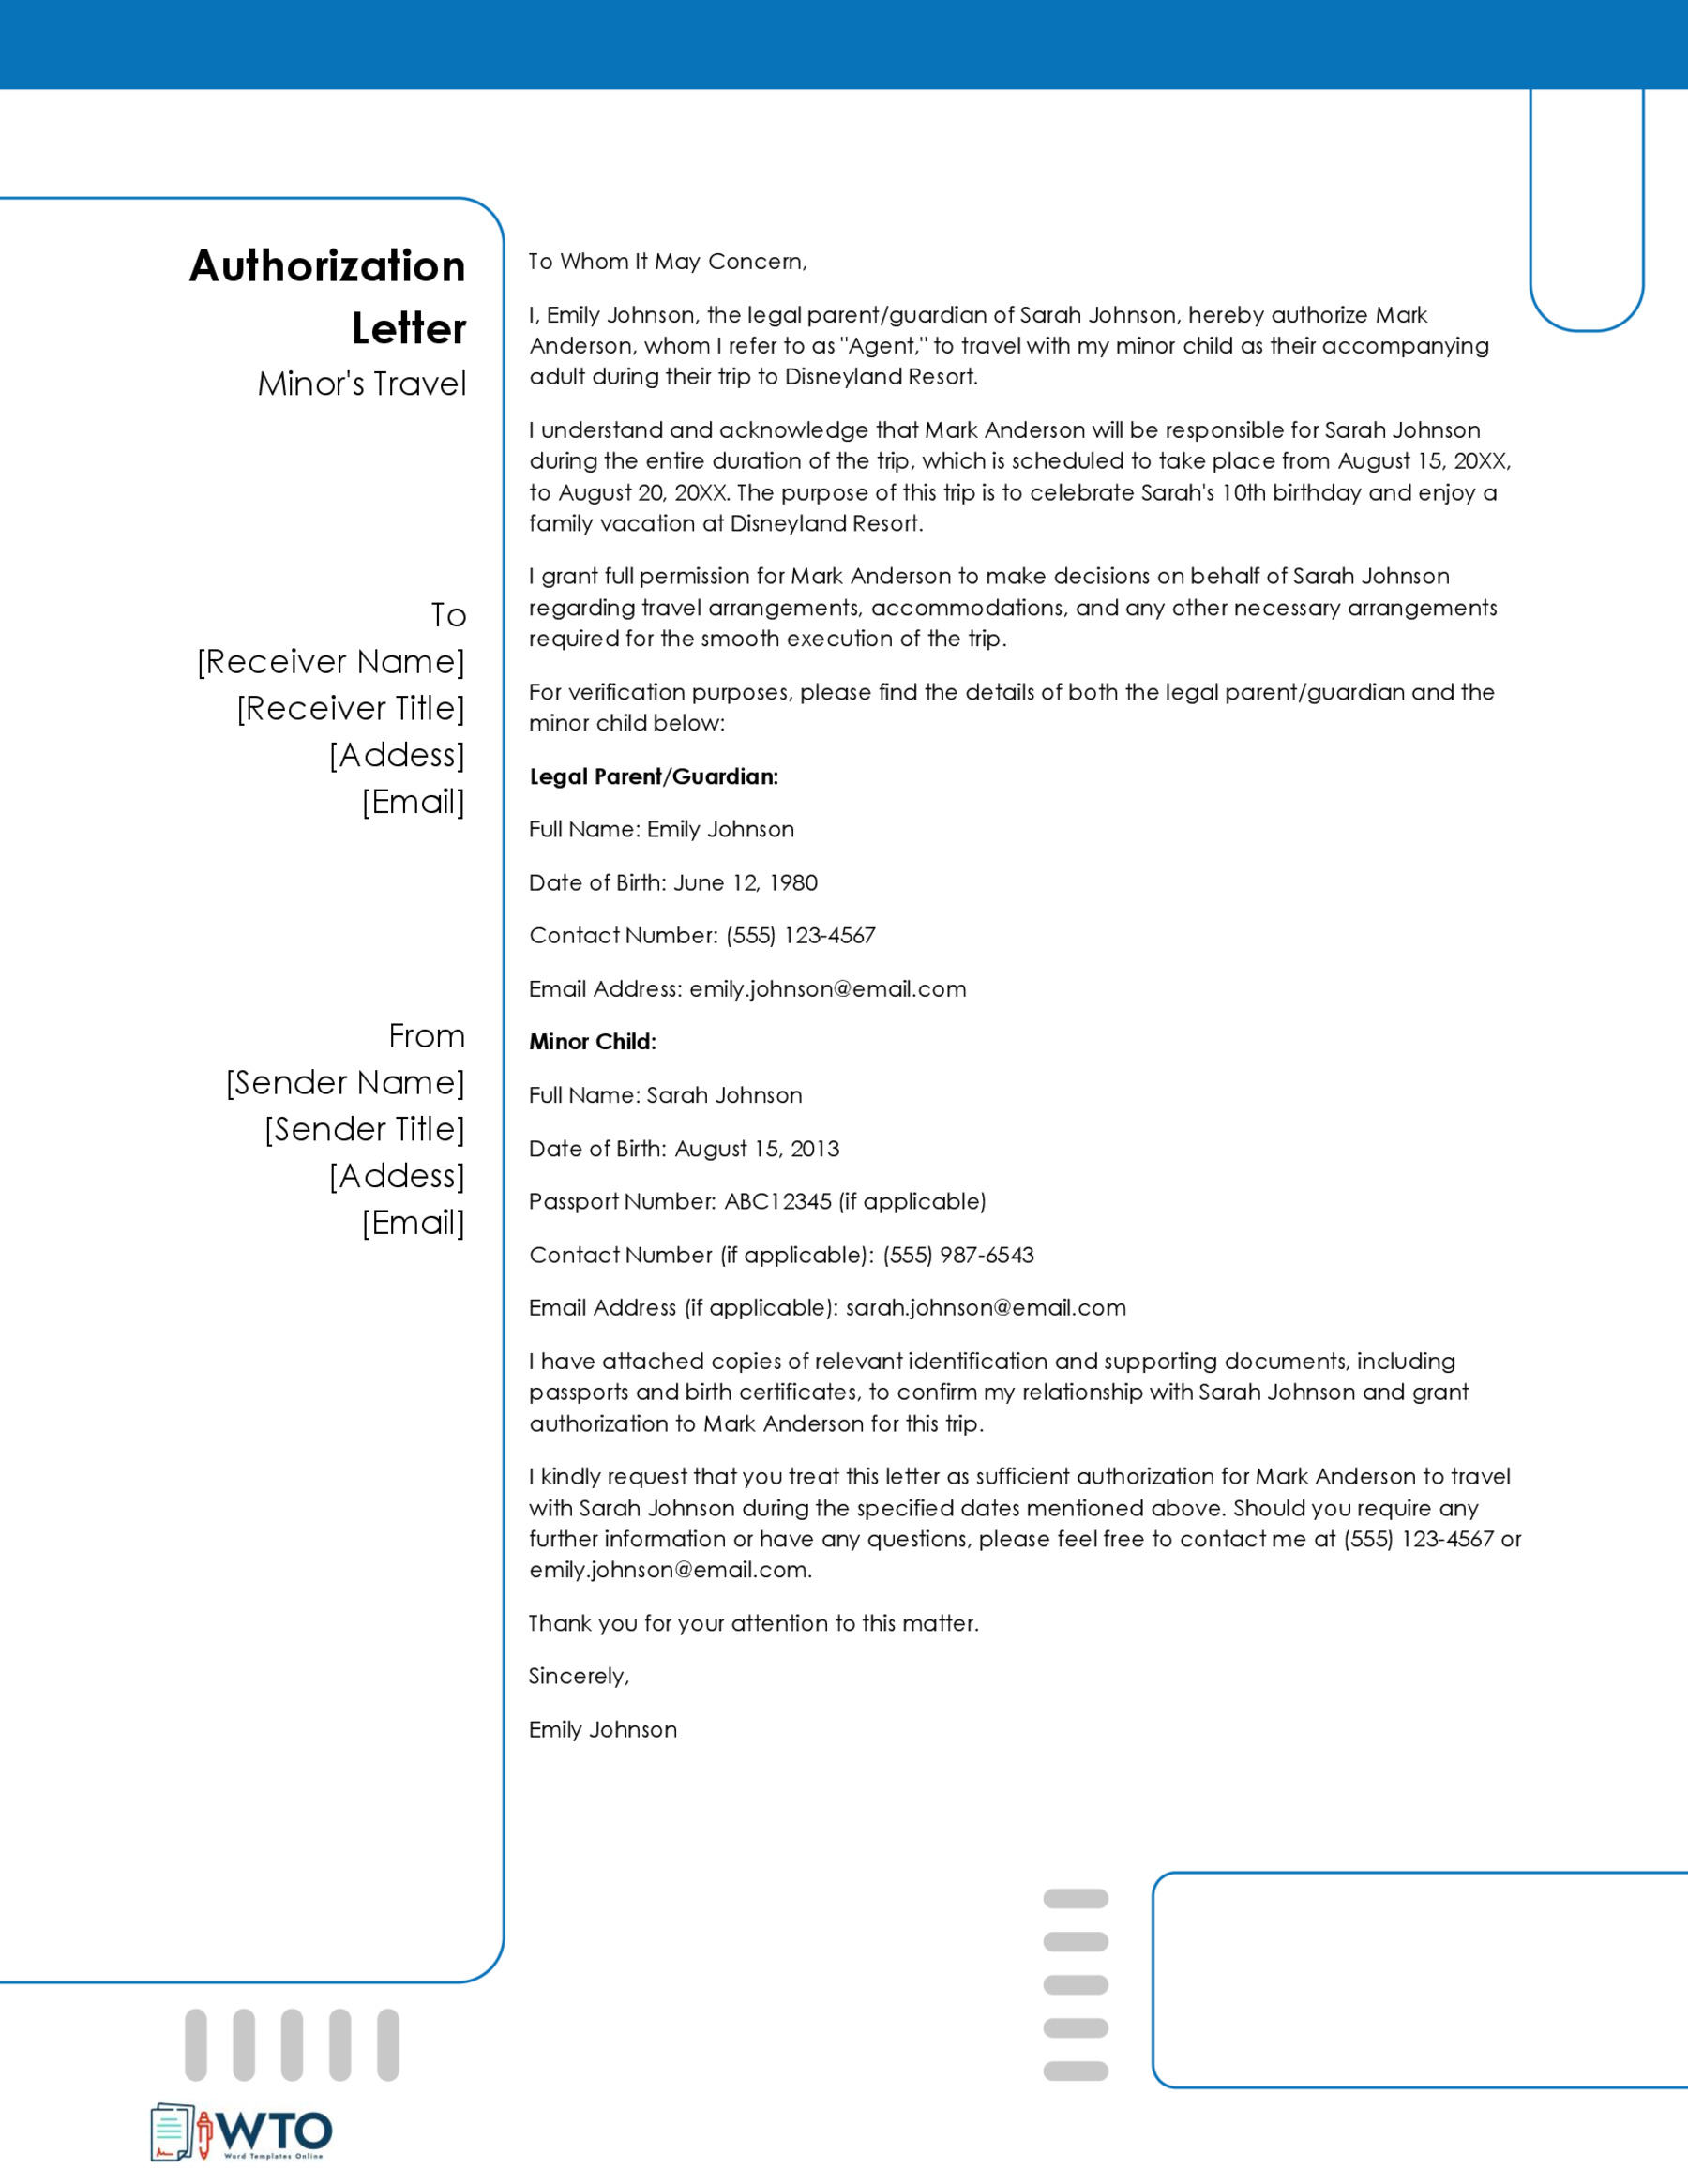 Sample of Authorization Letter toTravel with Minor-Word Format